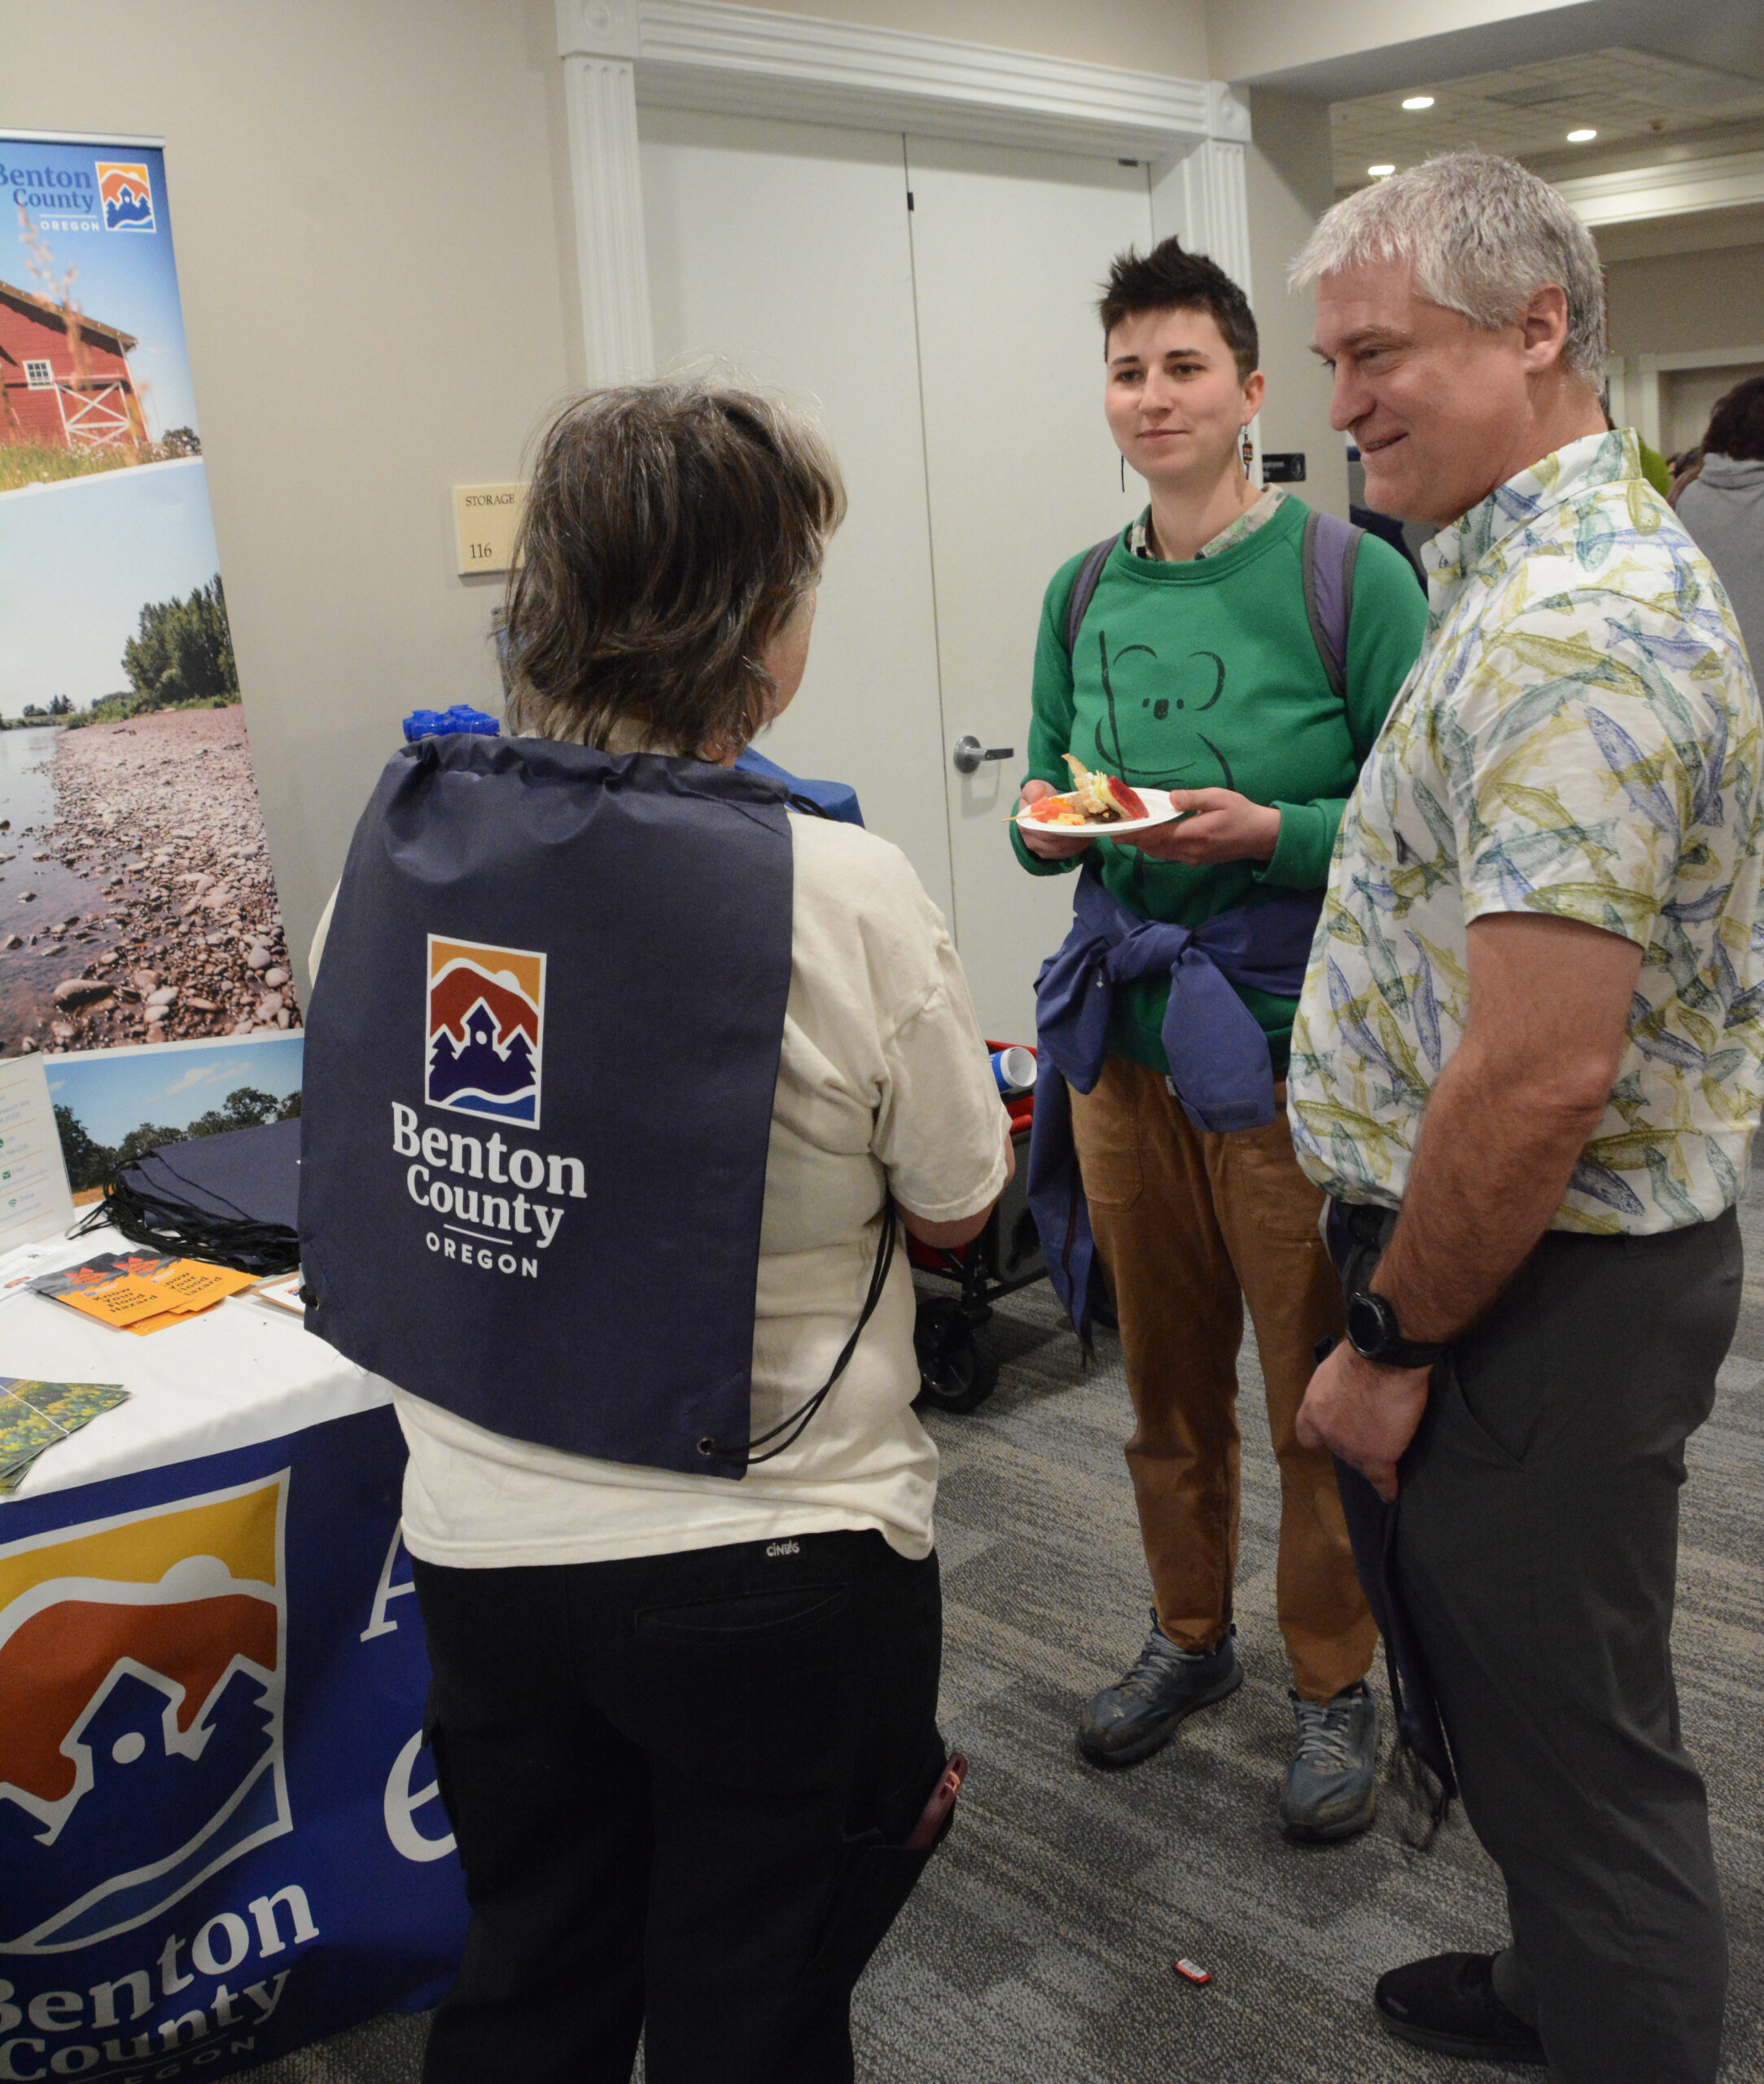 Community members stop by the Benton County table at the Sustainability Fair and speak with Community Development's Solid Waste Coordinator Bailey Payne.